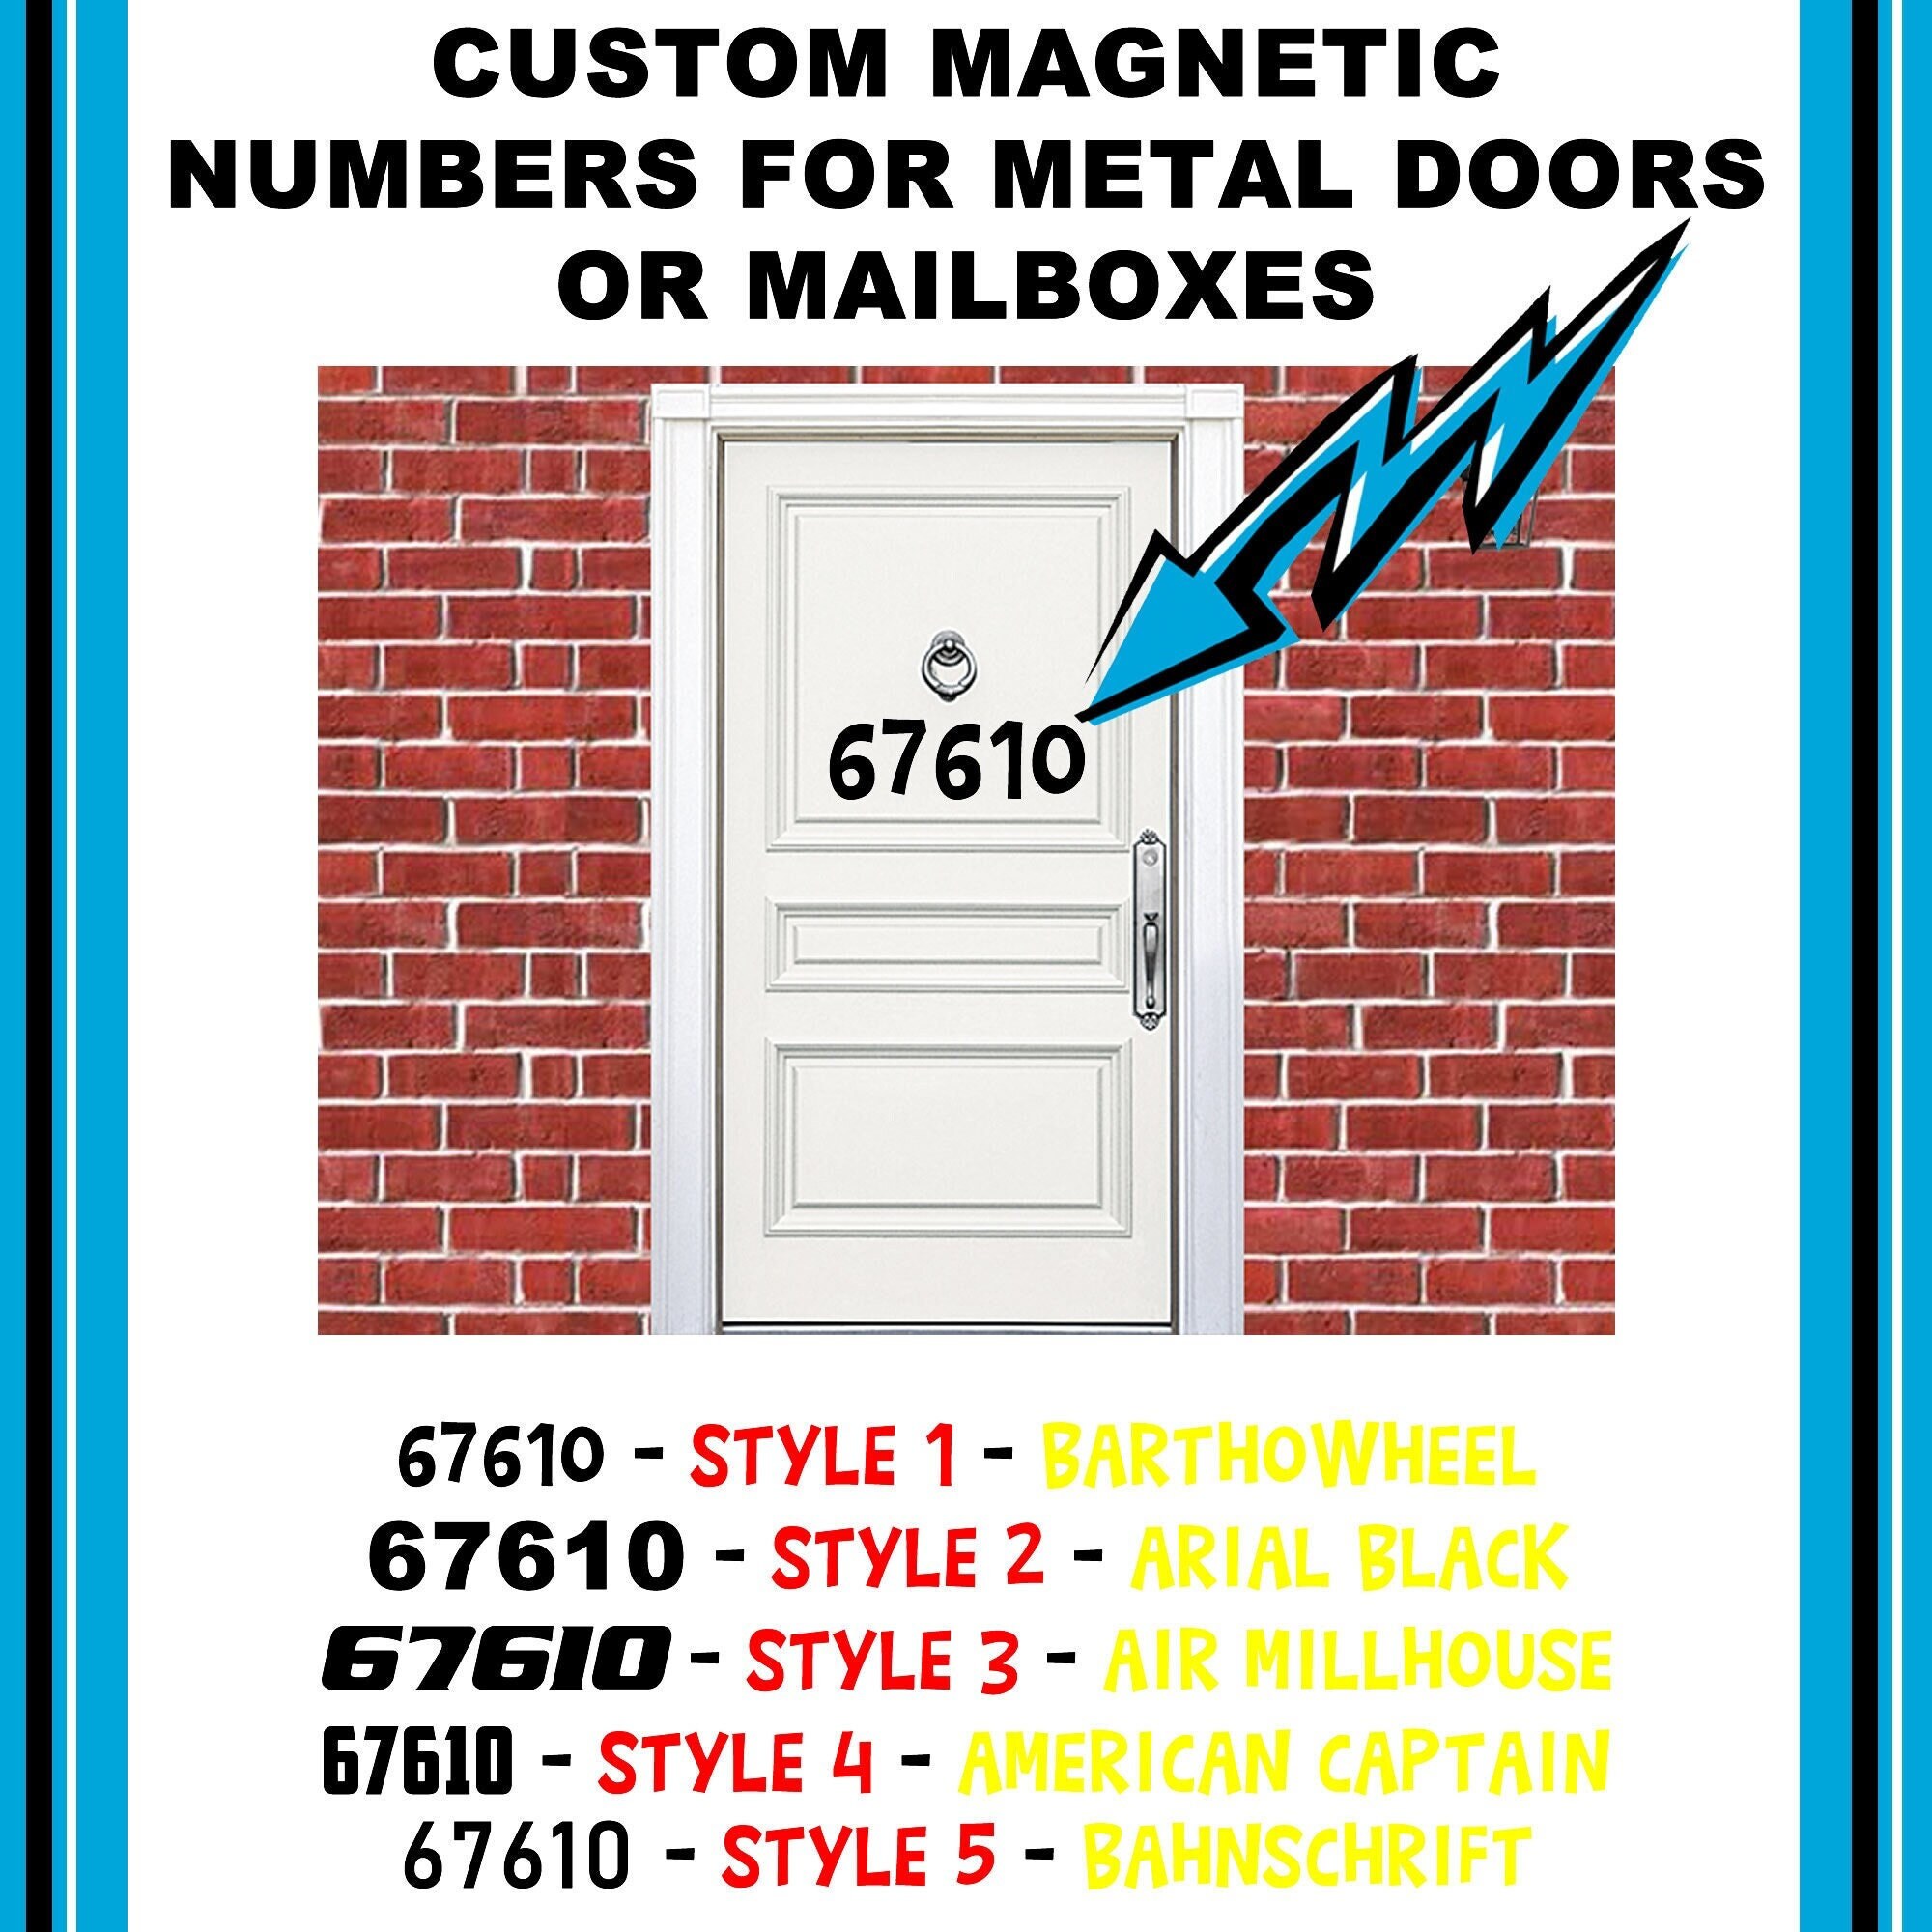 Up to 5 Numbers custom magnet in various font style for front doors, mailboxes, garage doors, custom made, various sizes up to 6 inches high